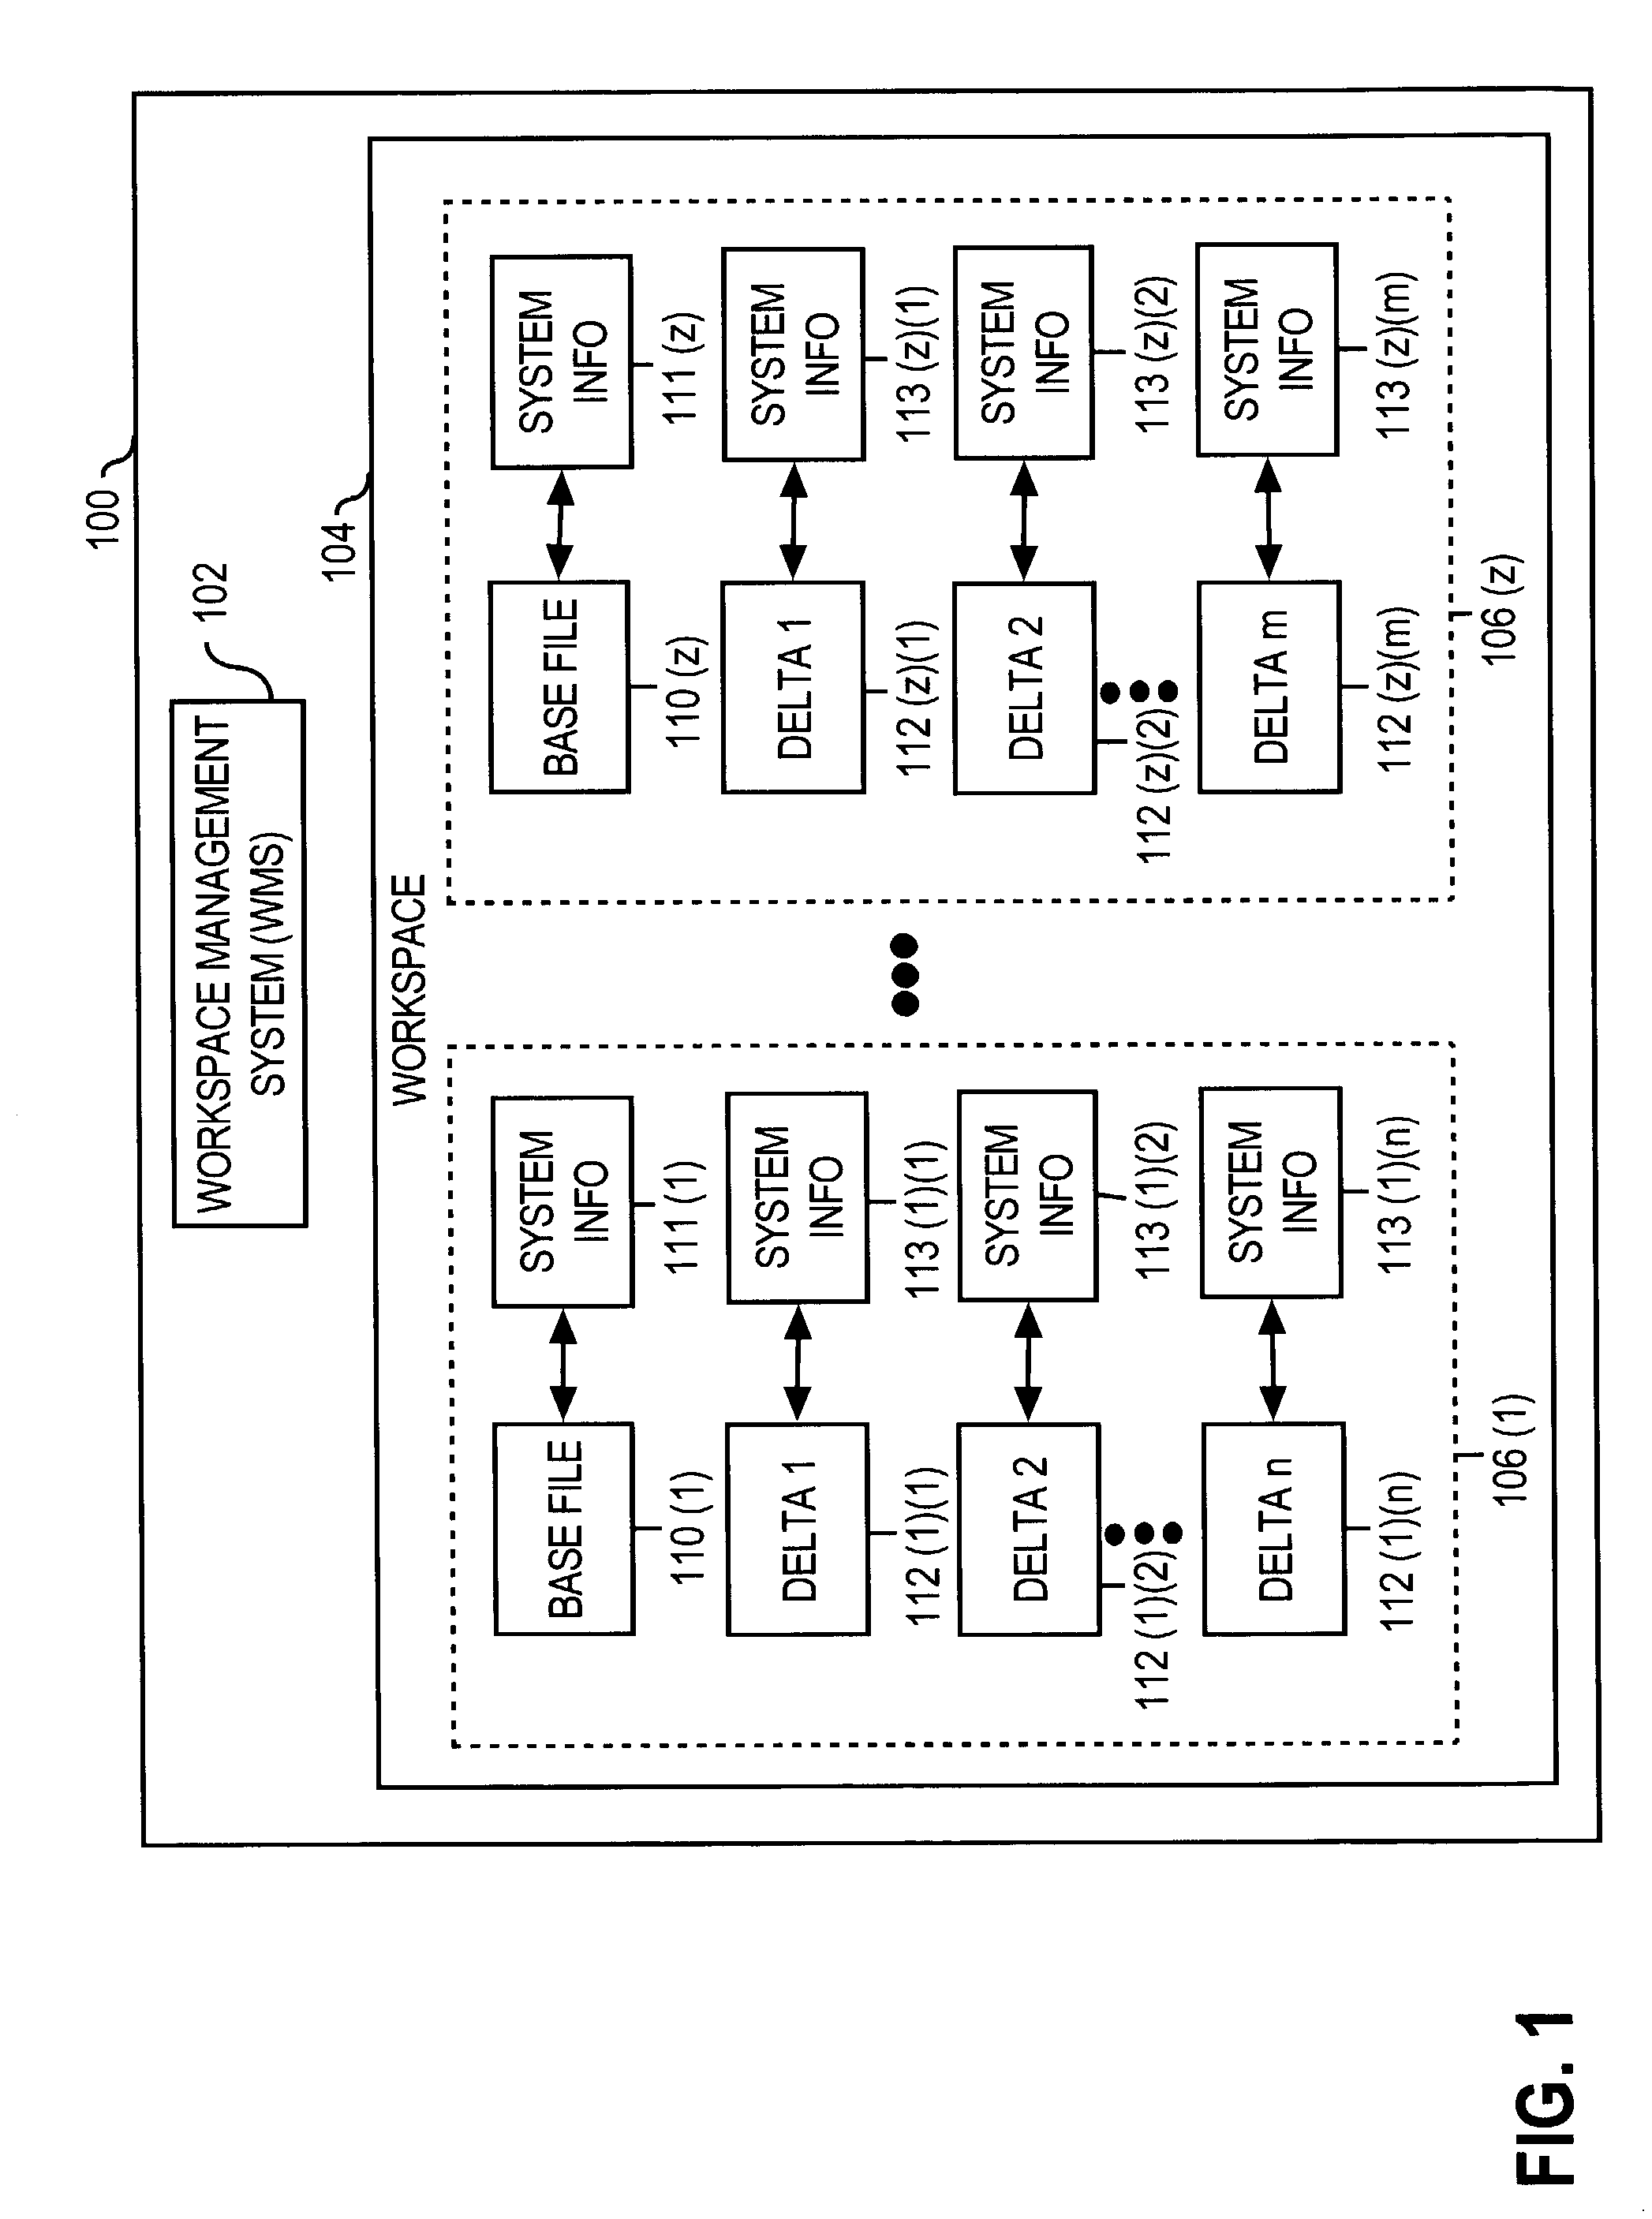 Mechanism for migrating a file sequence with versioning information from one workspace to another